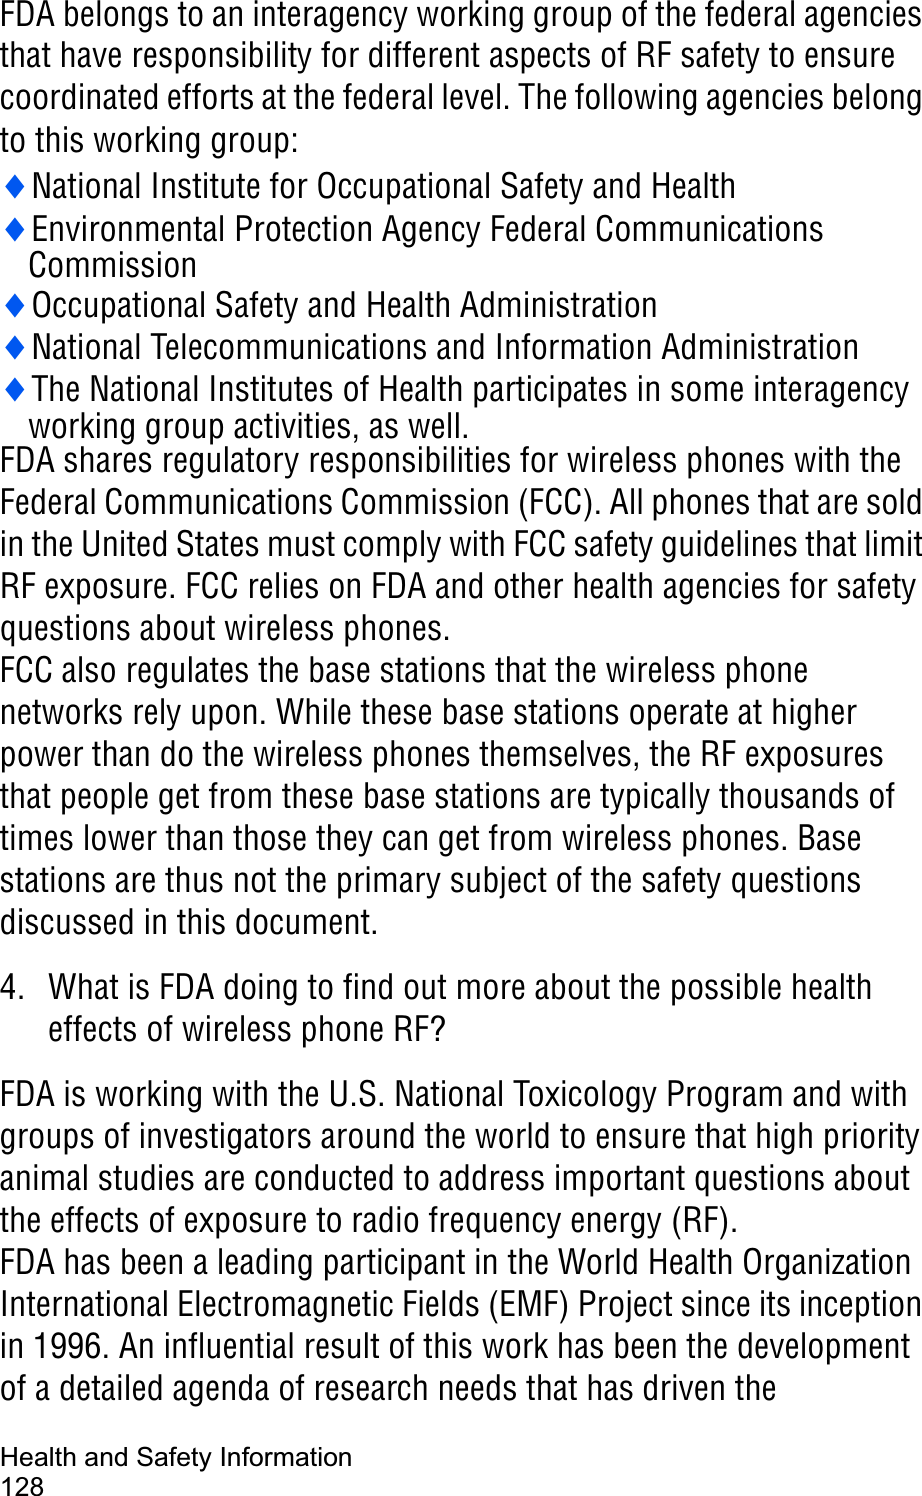 Health and Safety Information128FDA belongs to an interagency working group of the federal agencies that have responsibility for different aspects of RF safety to ensure coordinated efforts at the federal level. The following agencies belong to this working group:iNational Institute for Occupational Safety and HealthiEnvironmental Protection Agency Federal CommunicationsCommissioniOccupational Safety and Health AdministrationiNational Telecommunications and Information AdministrationiThe National Institutes of Health participates in some interagency working group activities, as well.FDA shares regulatory responsibilities for wireless phones with the Federal Communications Commission (FCC). All phones that are sold in the United States must comply with FCC safety guidelines that limit RF exposure. FCC relies on FDA and other health agencies for safety questions about wireless phones.FCC also regulates the base stations that the wireless phone networks rely upon. While these base stations operate at higher power than do the wireless phones themselves, the RF exposures that people get from these base stations are typically thousands of times lower than those they can get from wireless phones. Base stations are thus not the primary subject of the safety questions discussed in this document.4. What is FDA doing to find out more about the possible health effects of wireless phone RF?FDA is working with the U.S. National Toxicology Program and with groups of investigators around the world to ensure that high priority animal studies are conducted to address important questions about the effects of exposure to radio frequency energy (RF).FDA has been a leading participant in the World Health Organization International Electromagnetic Fields (EMF) Project since its inception in 1996. An influential result of this work has been the development of a detailed agenda of research needs that has driven the 